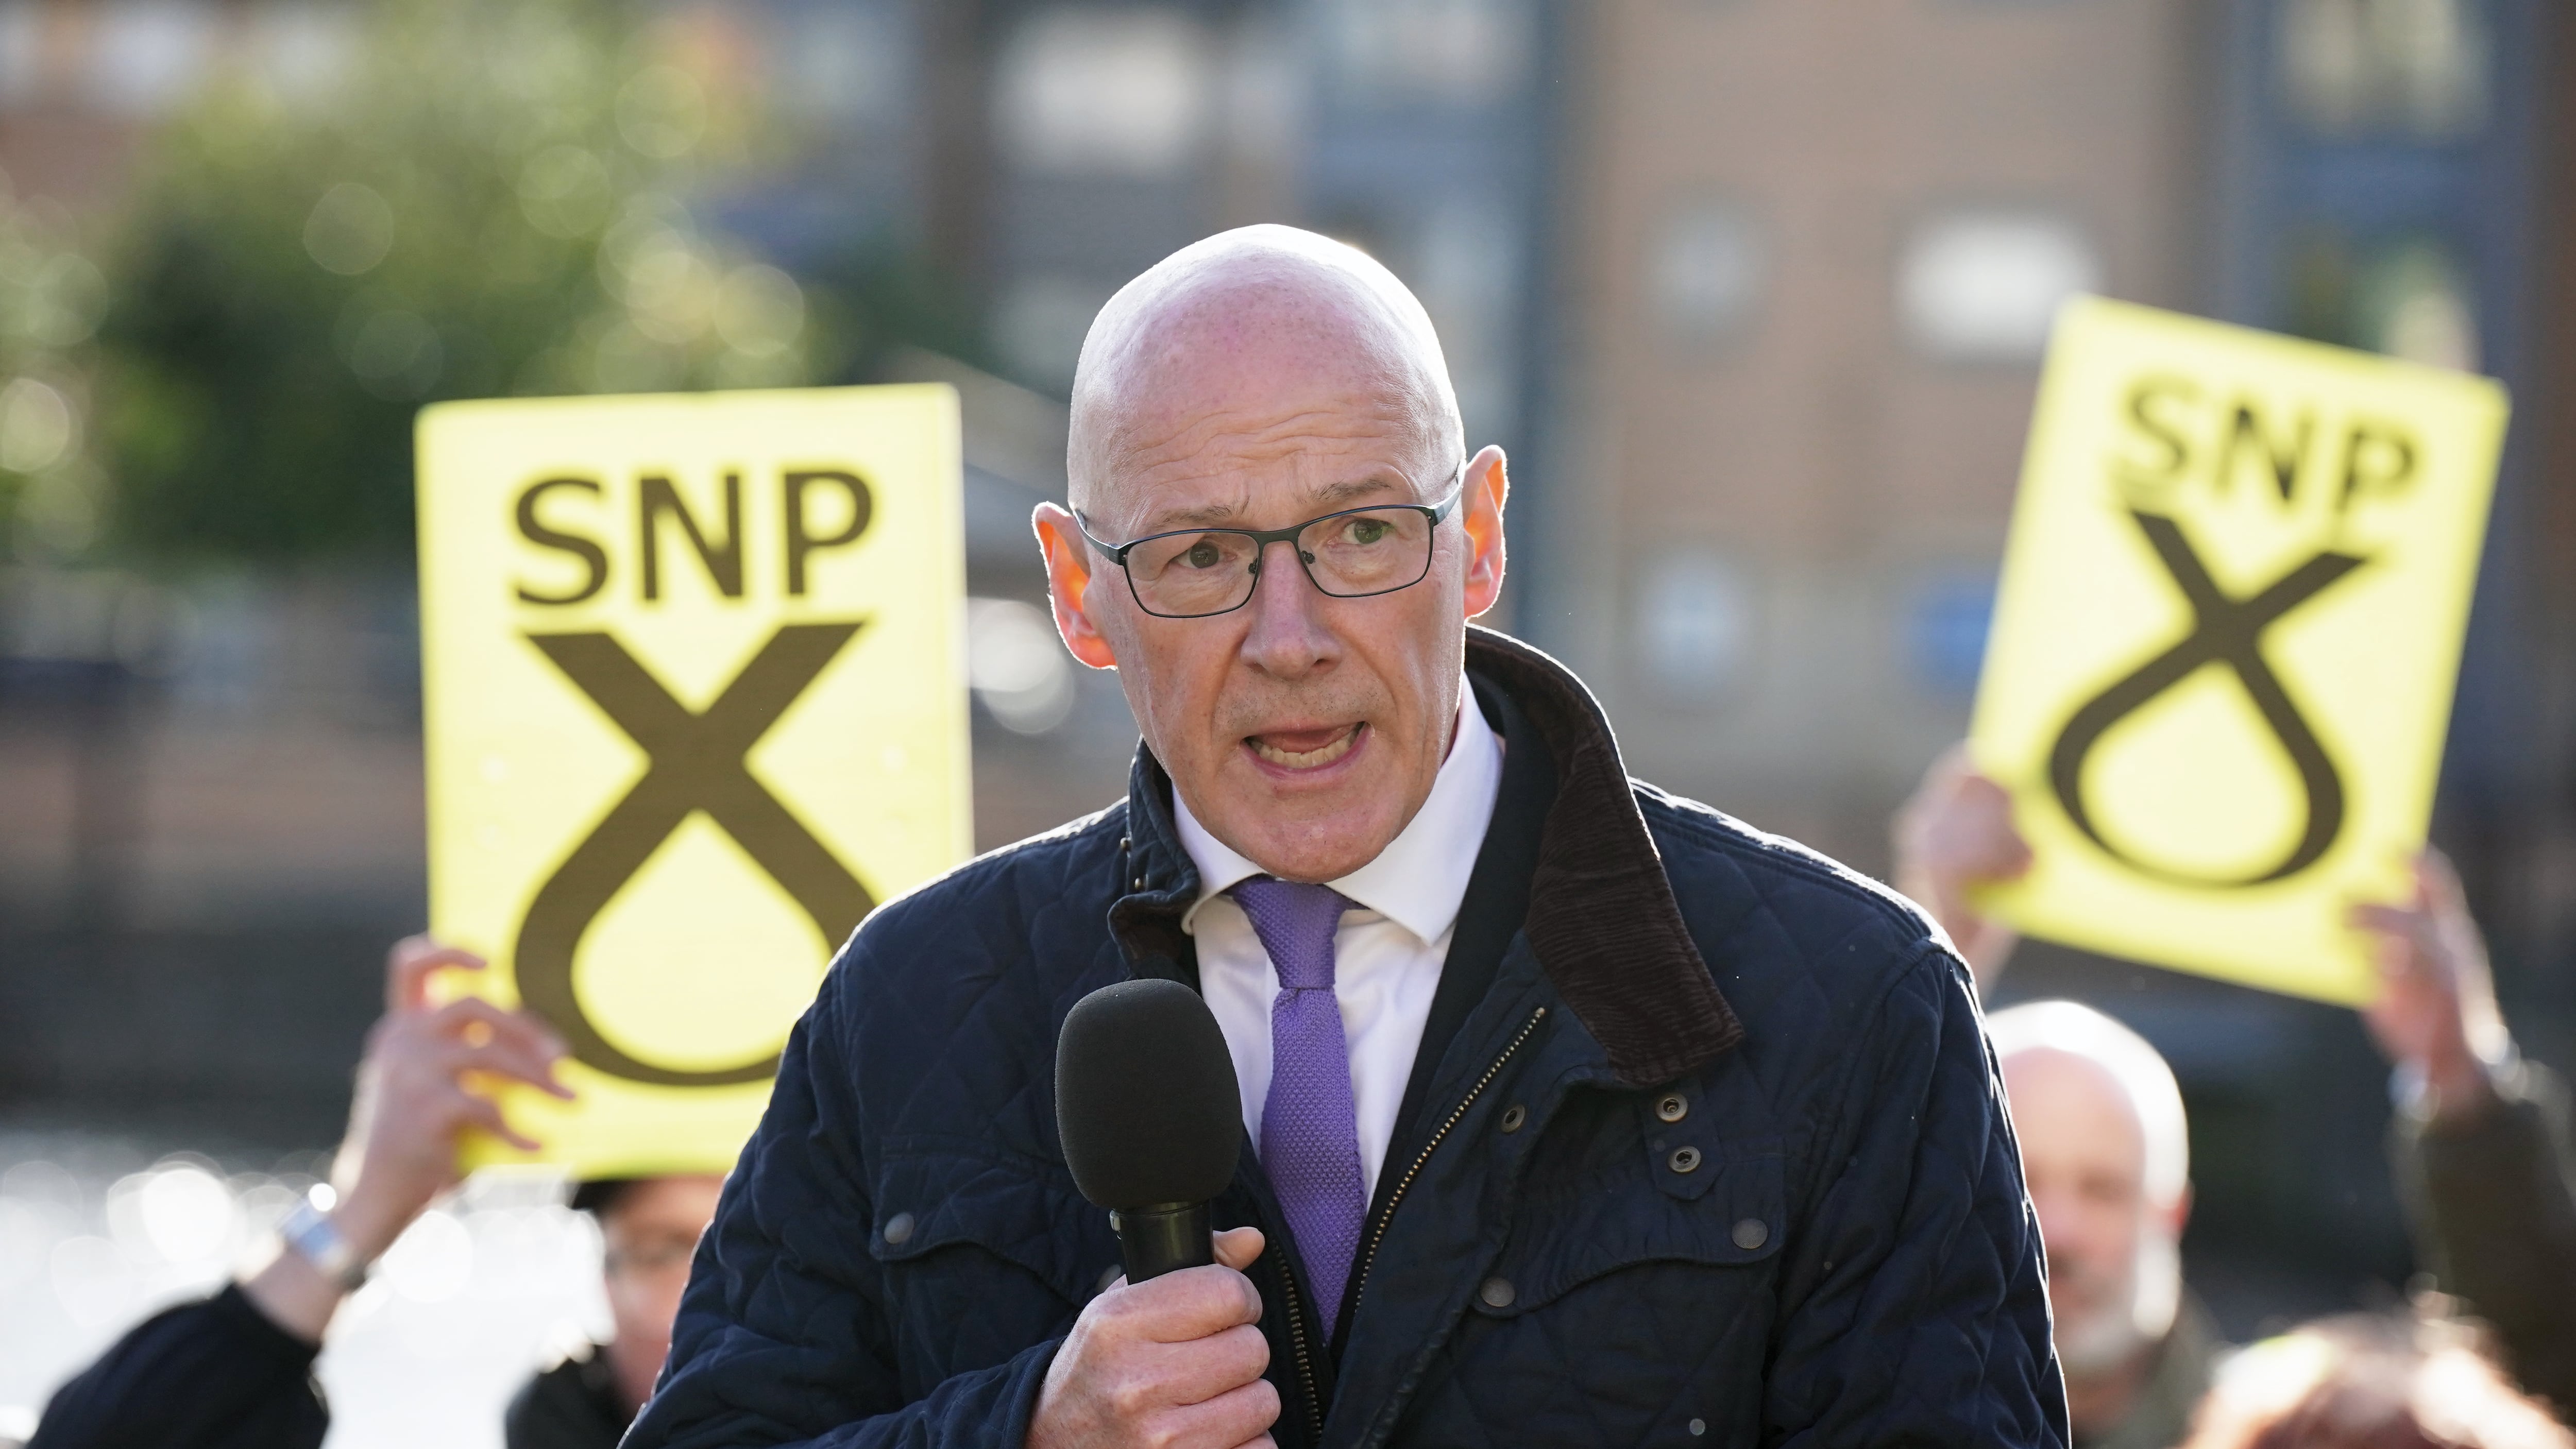 Scottish First Minister and SNP leader John Swinney urged ‘every single SNP voter’ to vote on Thursday